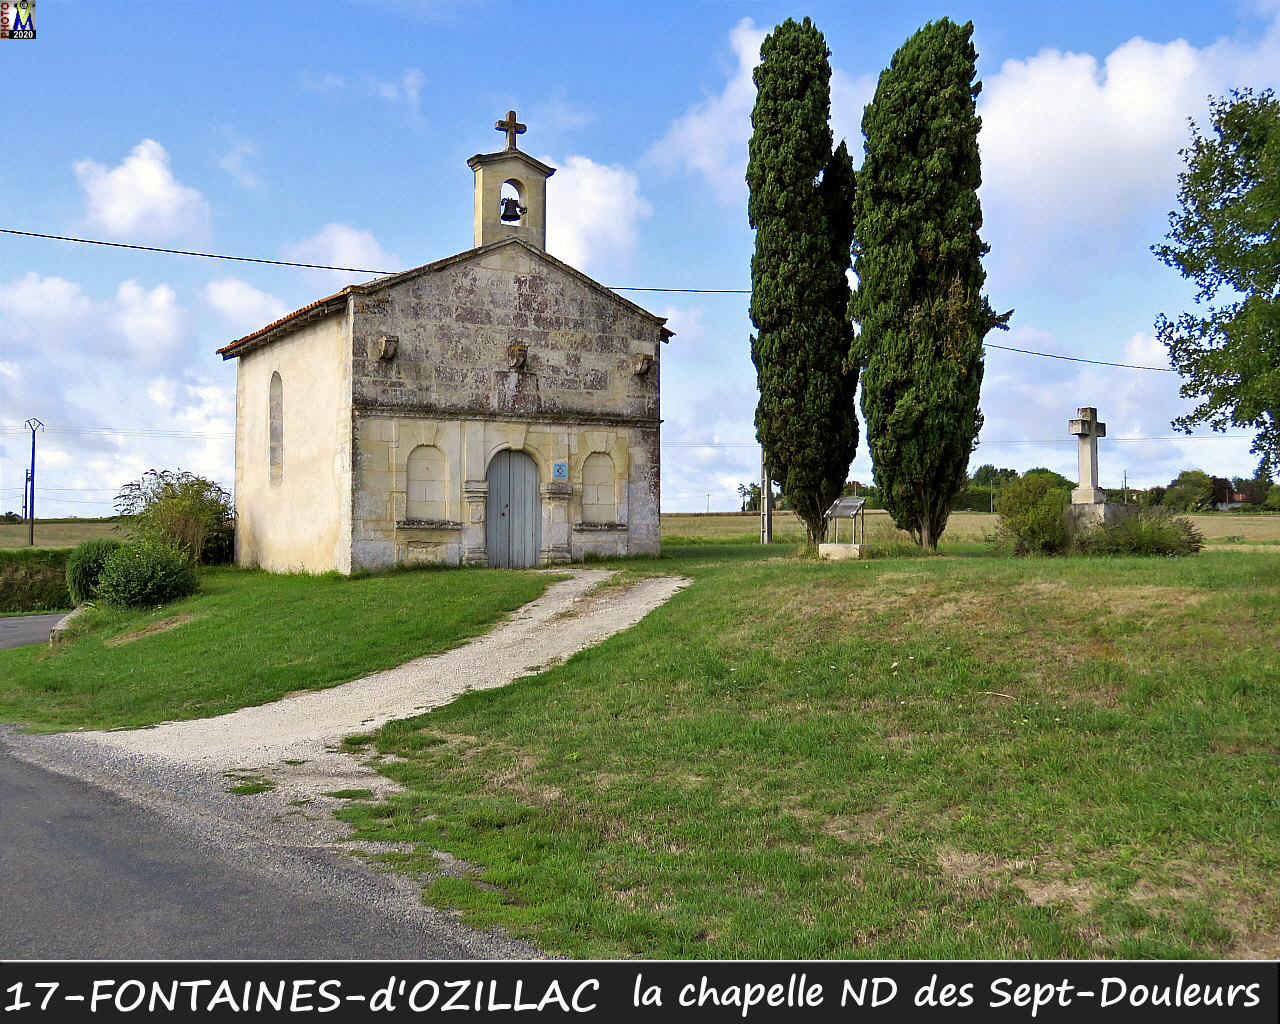 17FONTAINE-OZILLAC_chapelle_1000.jpg